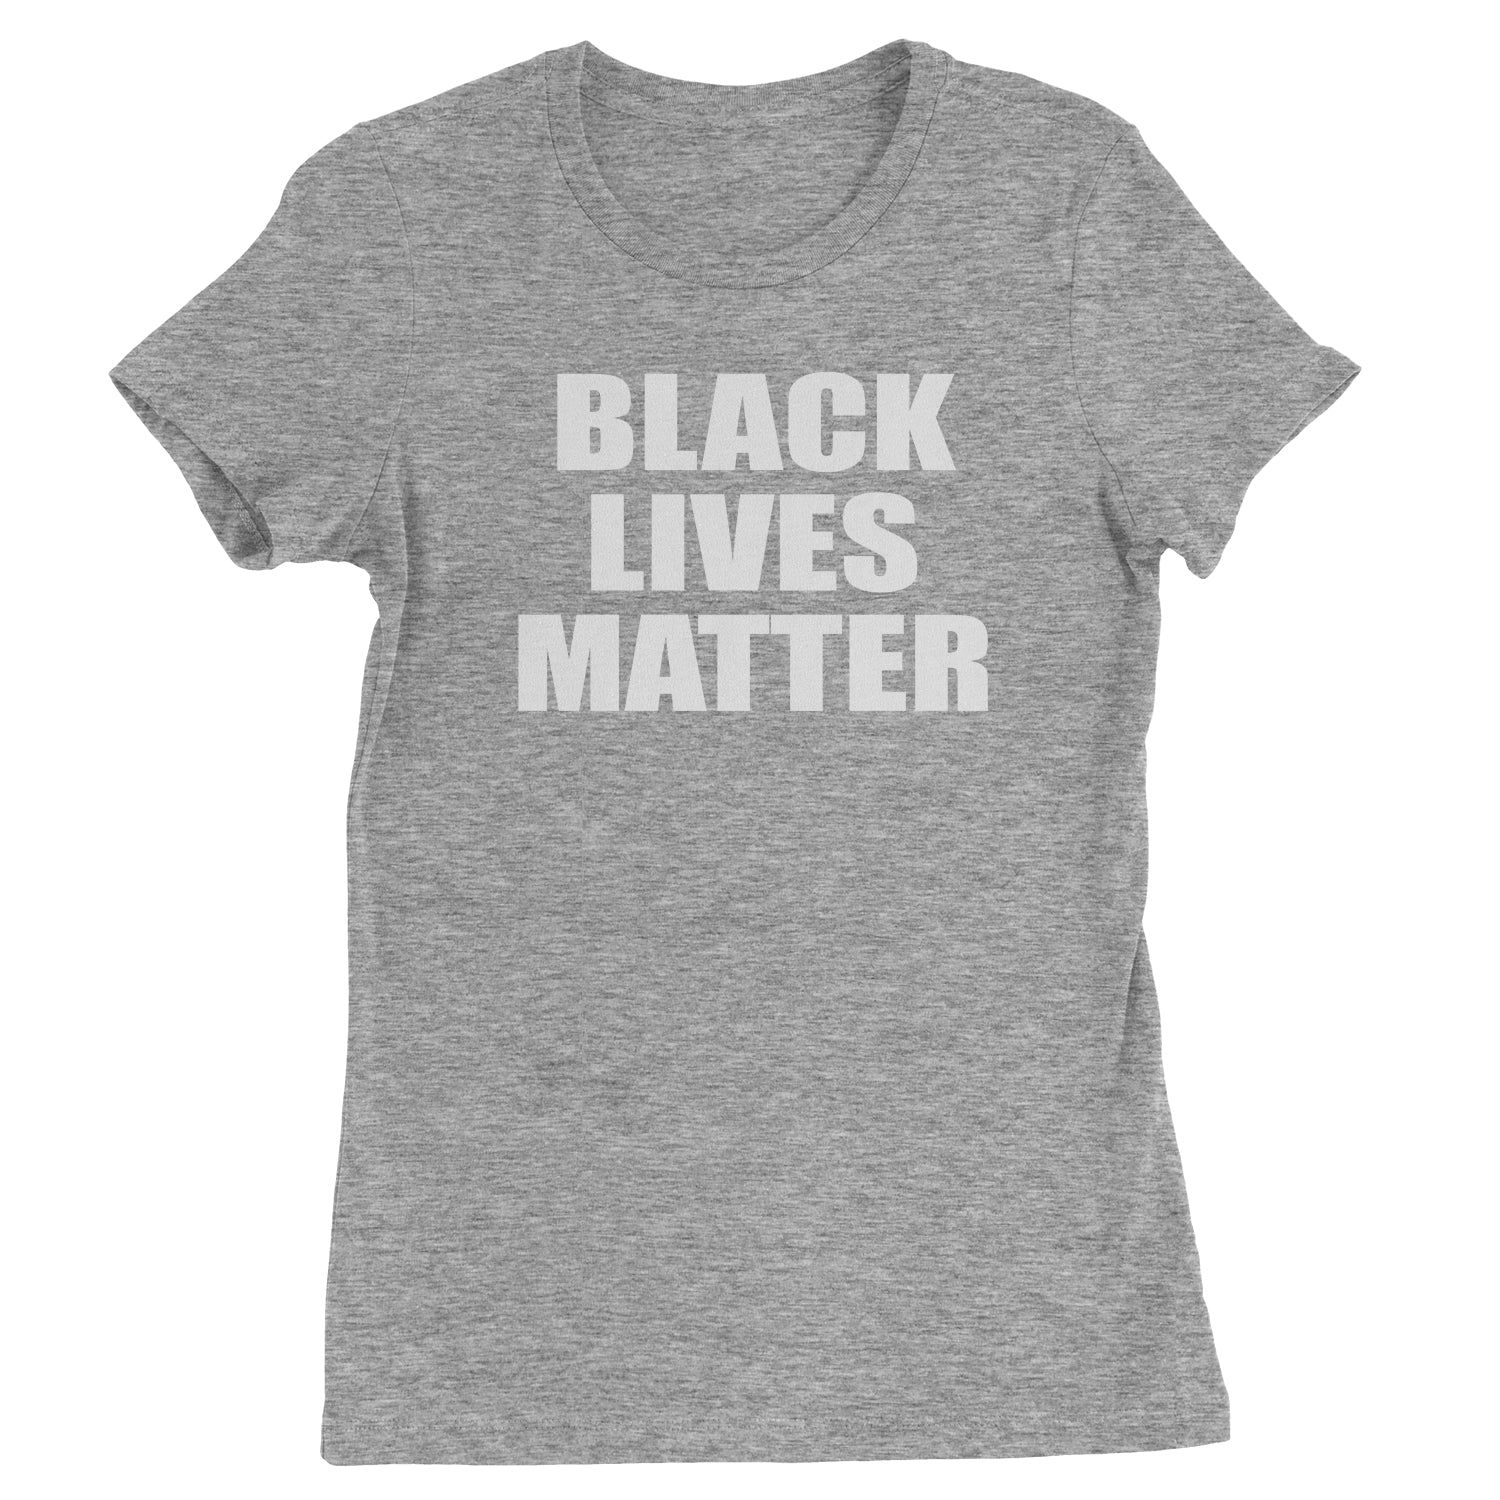 Black Lives Matter BLM Womens T-shirt african, africanamerican, ahmaud, american, arberry, breonna, brutality, end, justice, taylor by Expression Tees